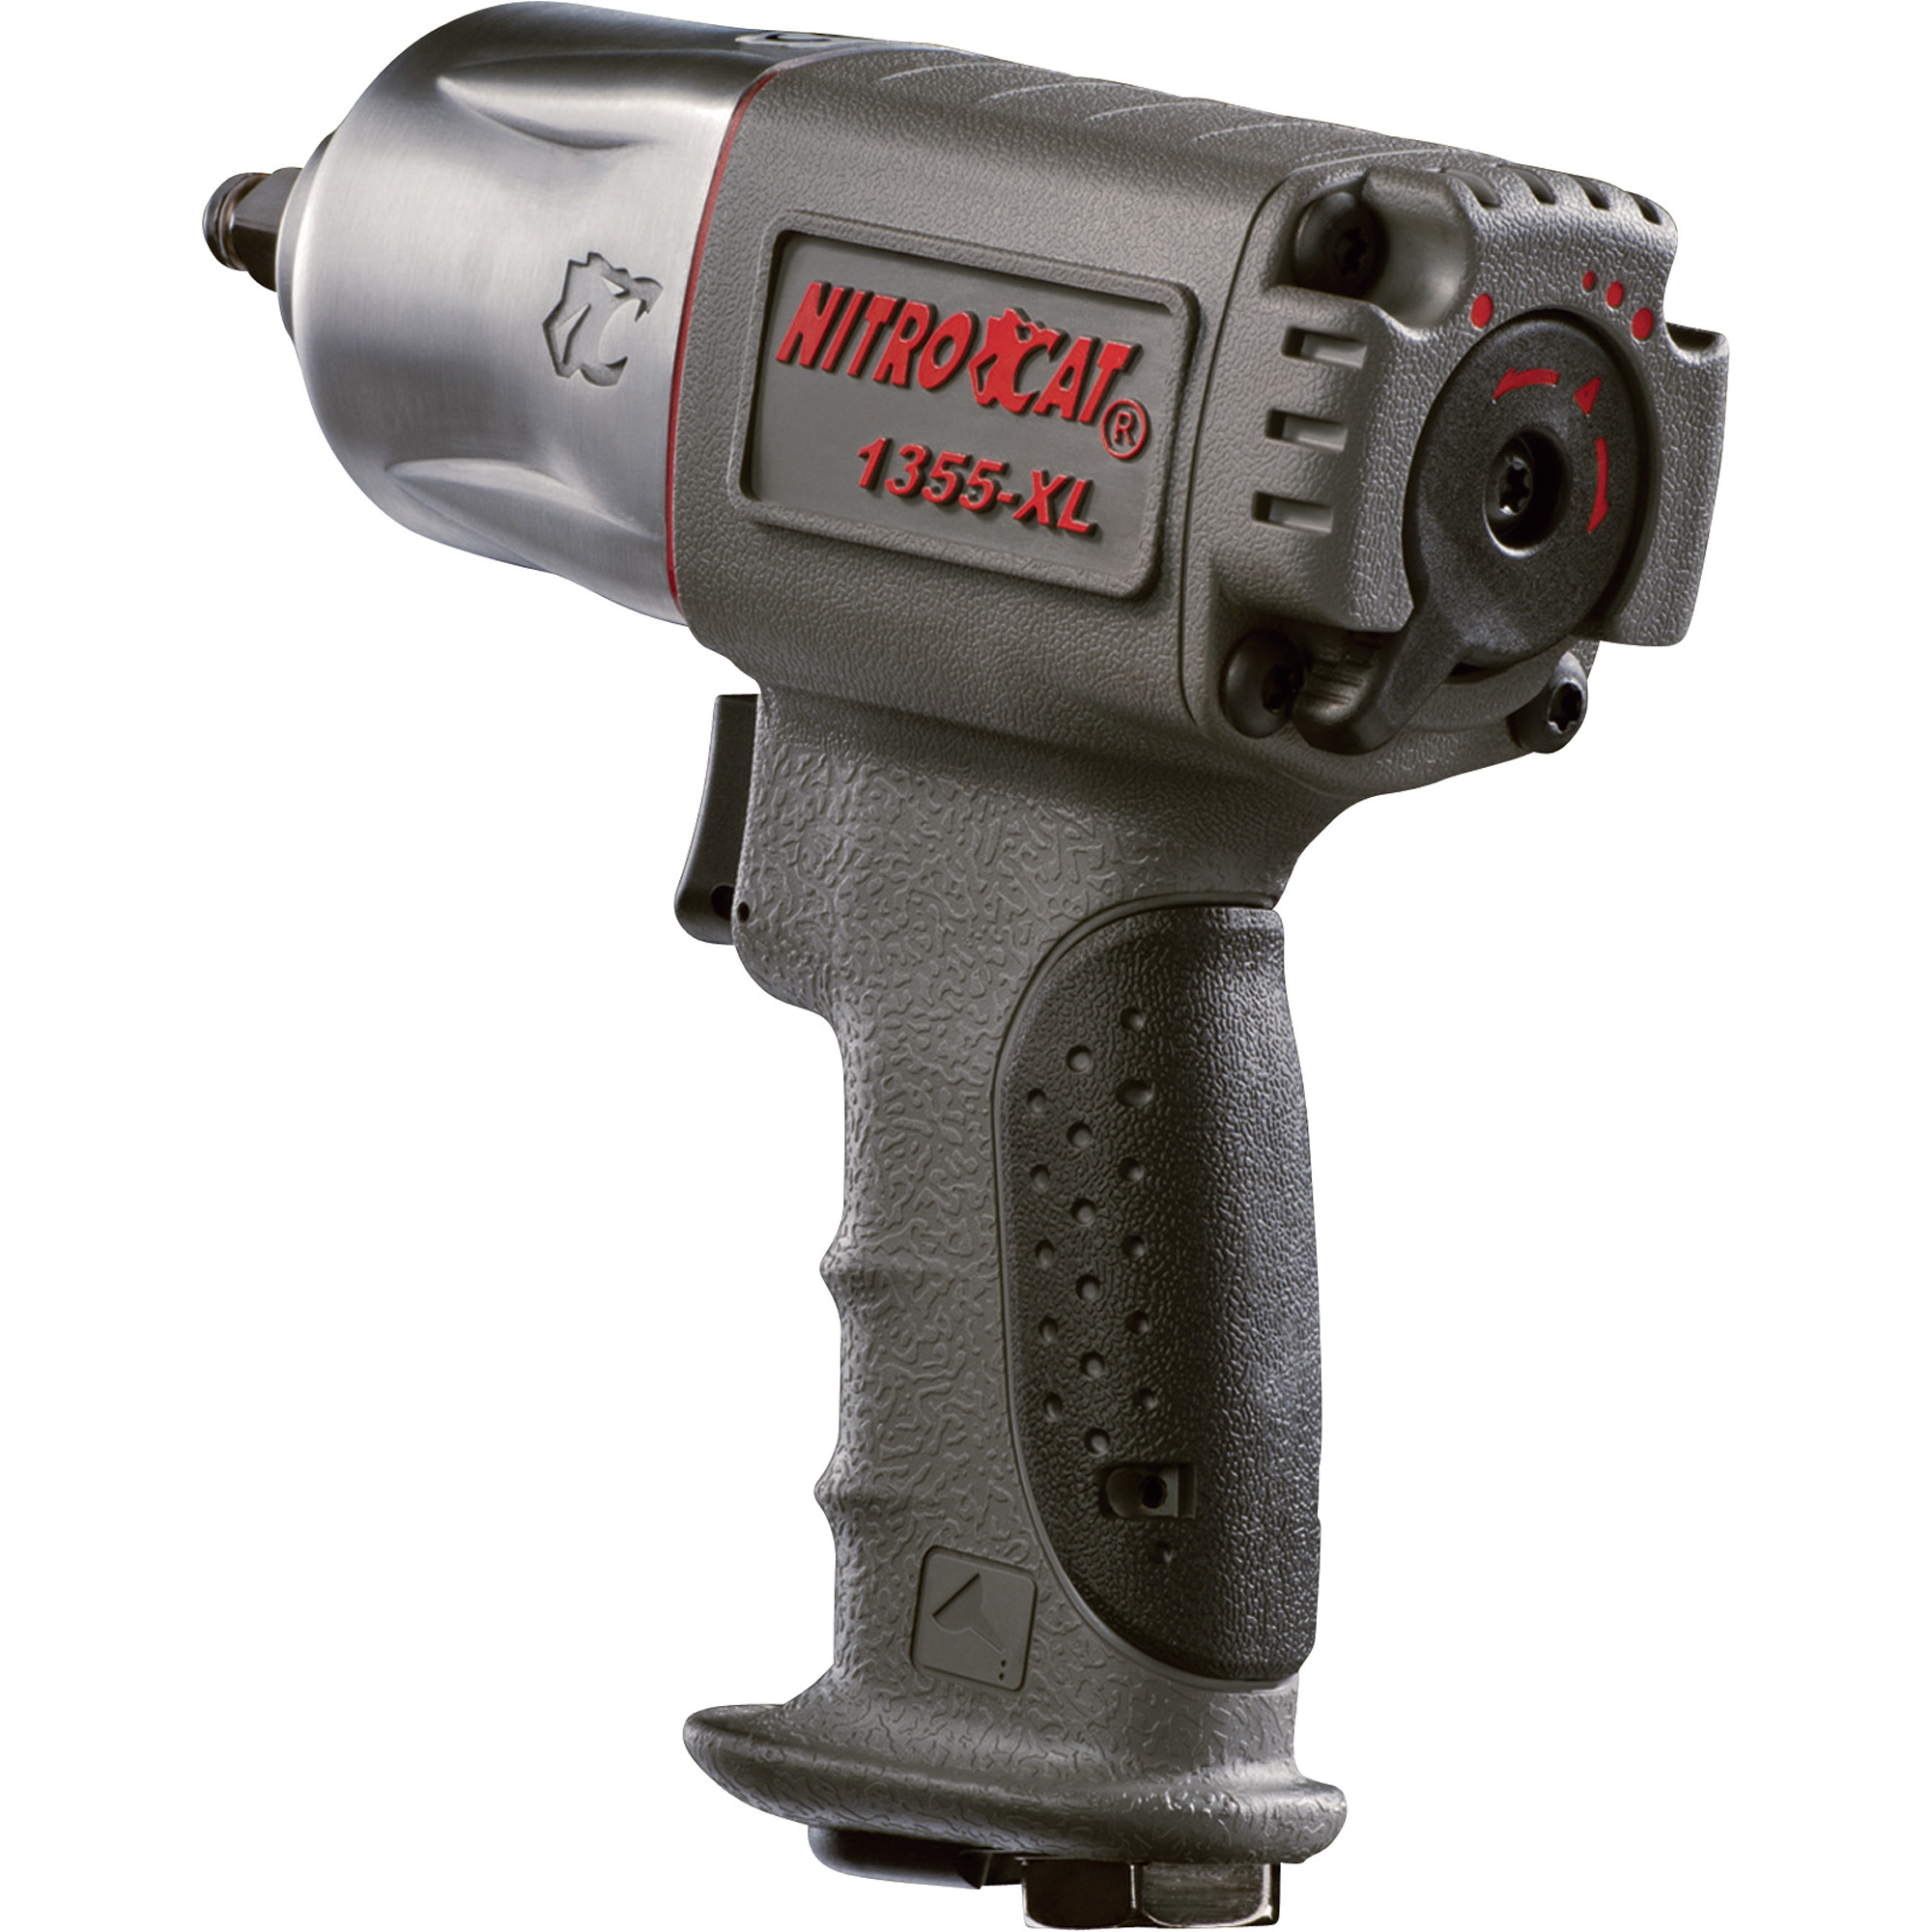 NitroCat 3/8Inch Xtreme Torque Composite Air Impact Wrench, Model 1355-XL